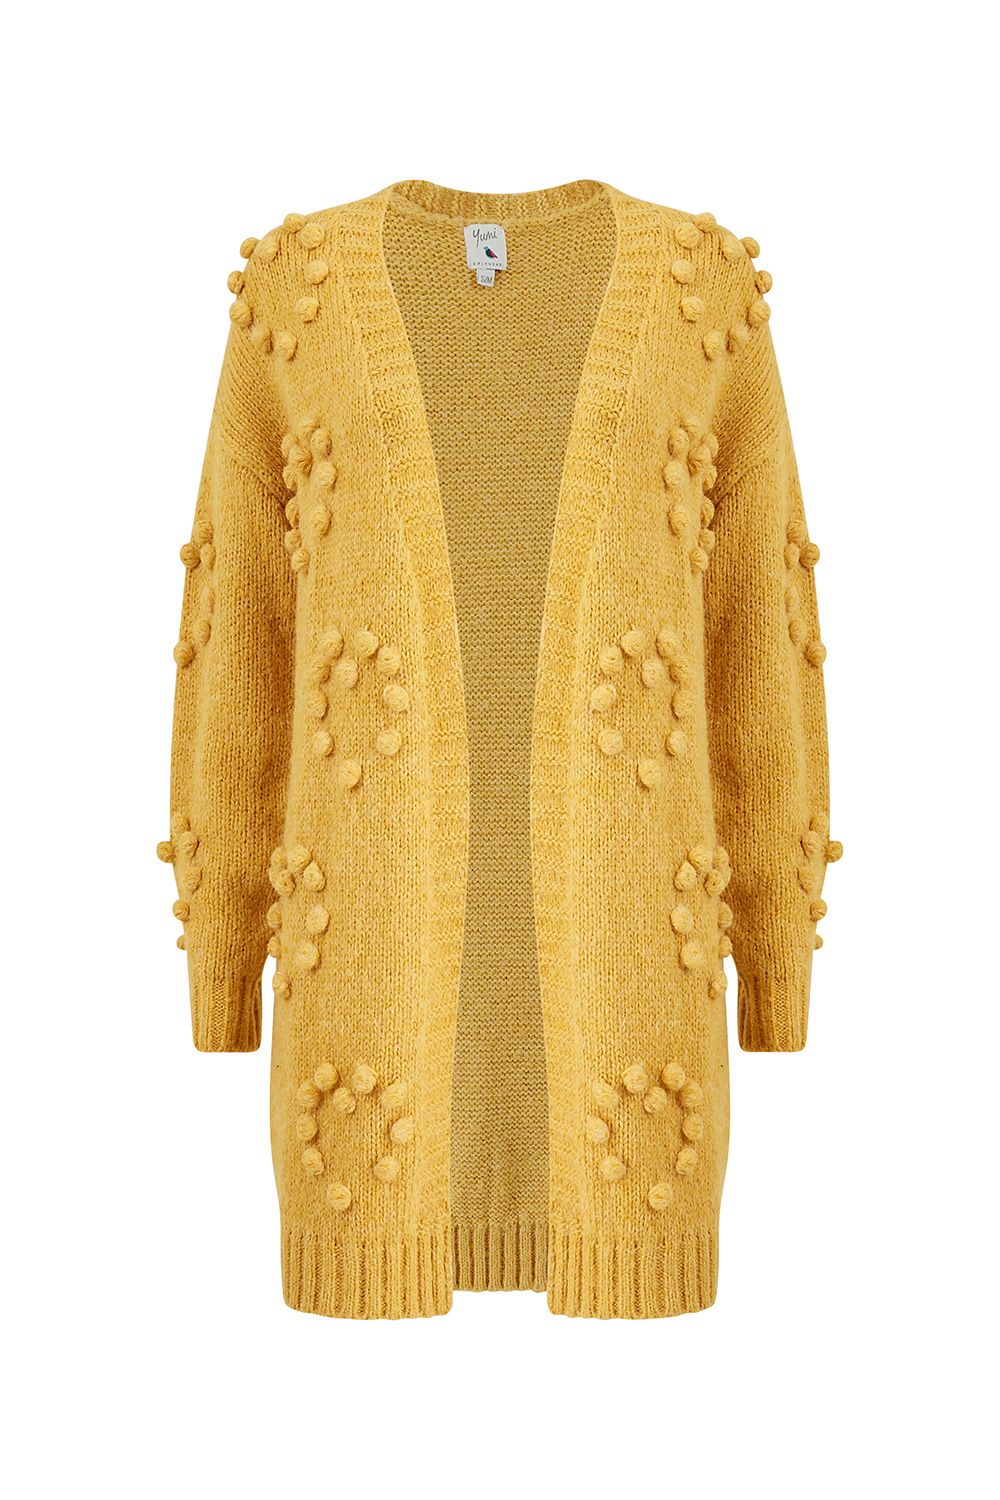 Super soft and in a stunning mustard, this Yumi Mustard Knitted Pom-Pom Heart Long Cardi features statement hand knitted pom poms crafted in heart shaped patterns. A gorgeous, relaxed long cardigan perfect for layering and causal yet cosy weekend wear.